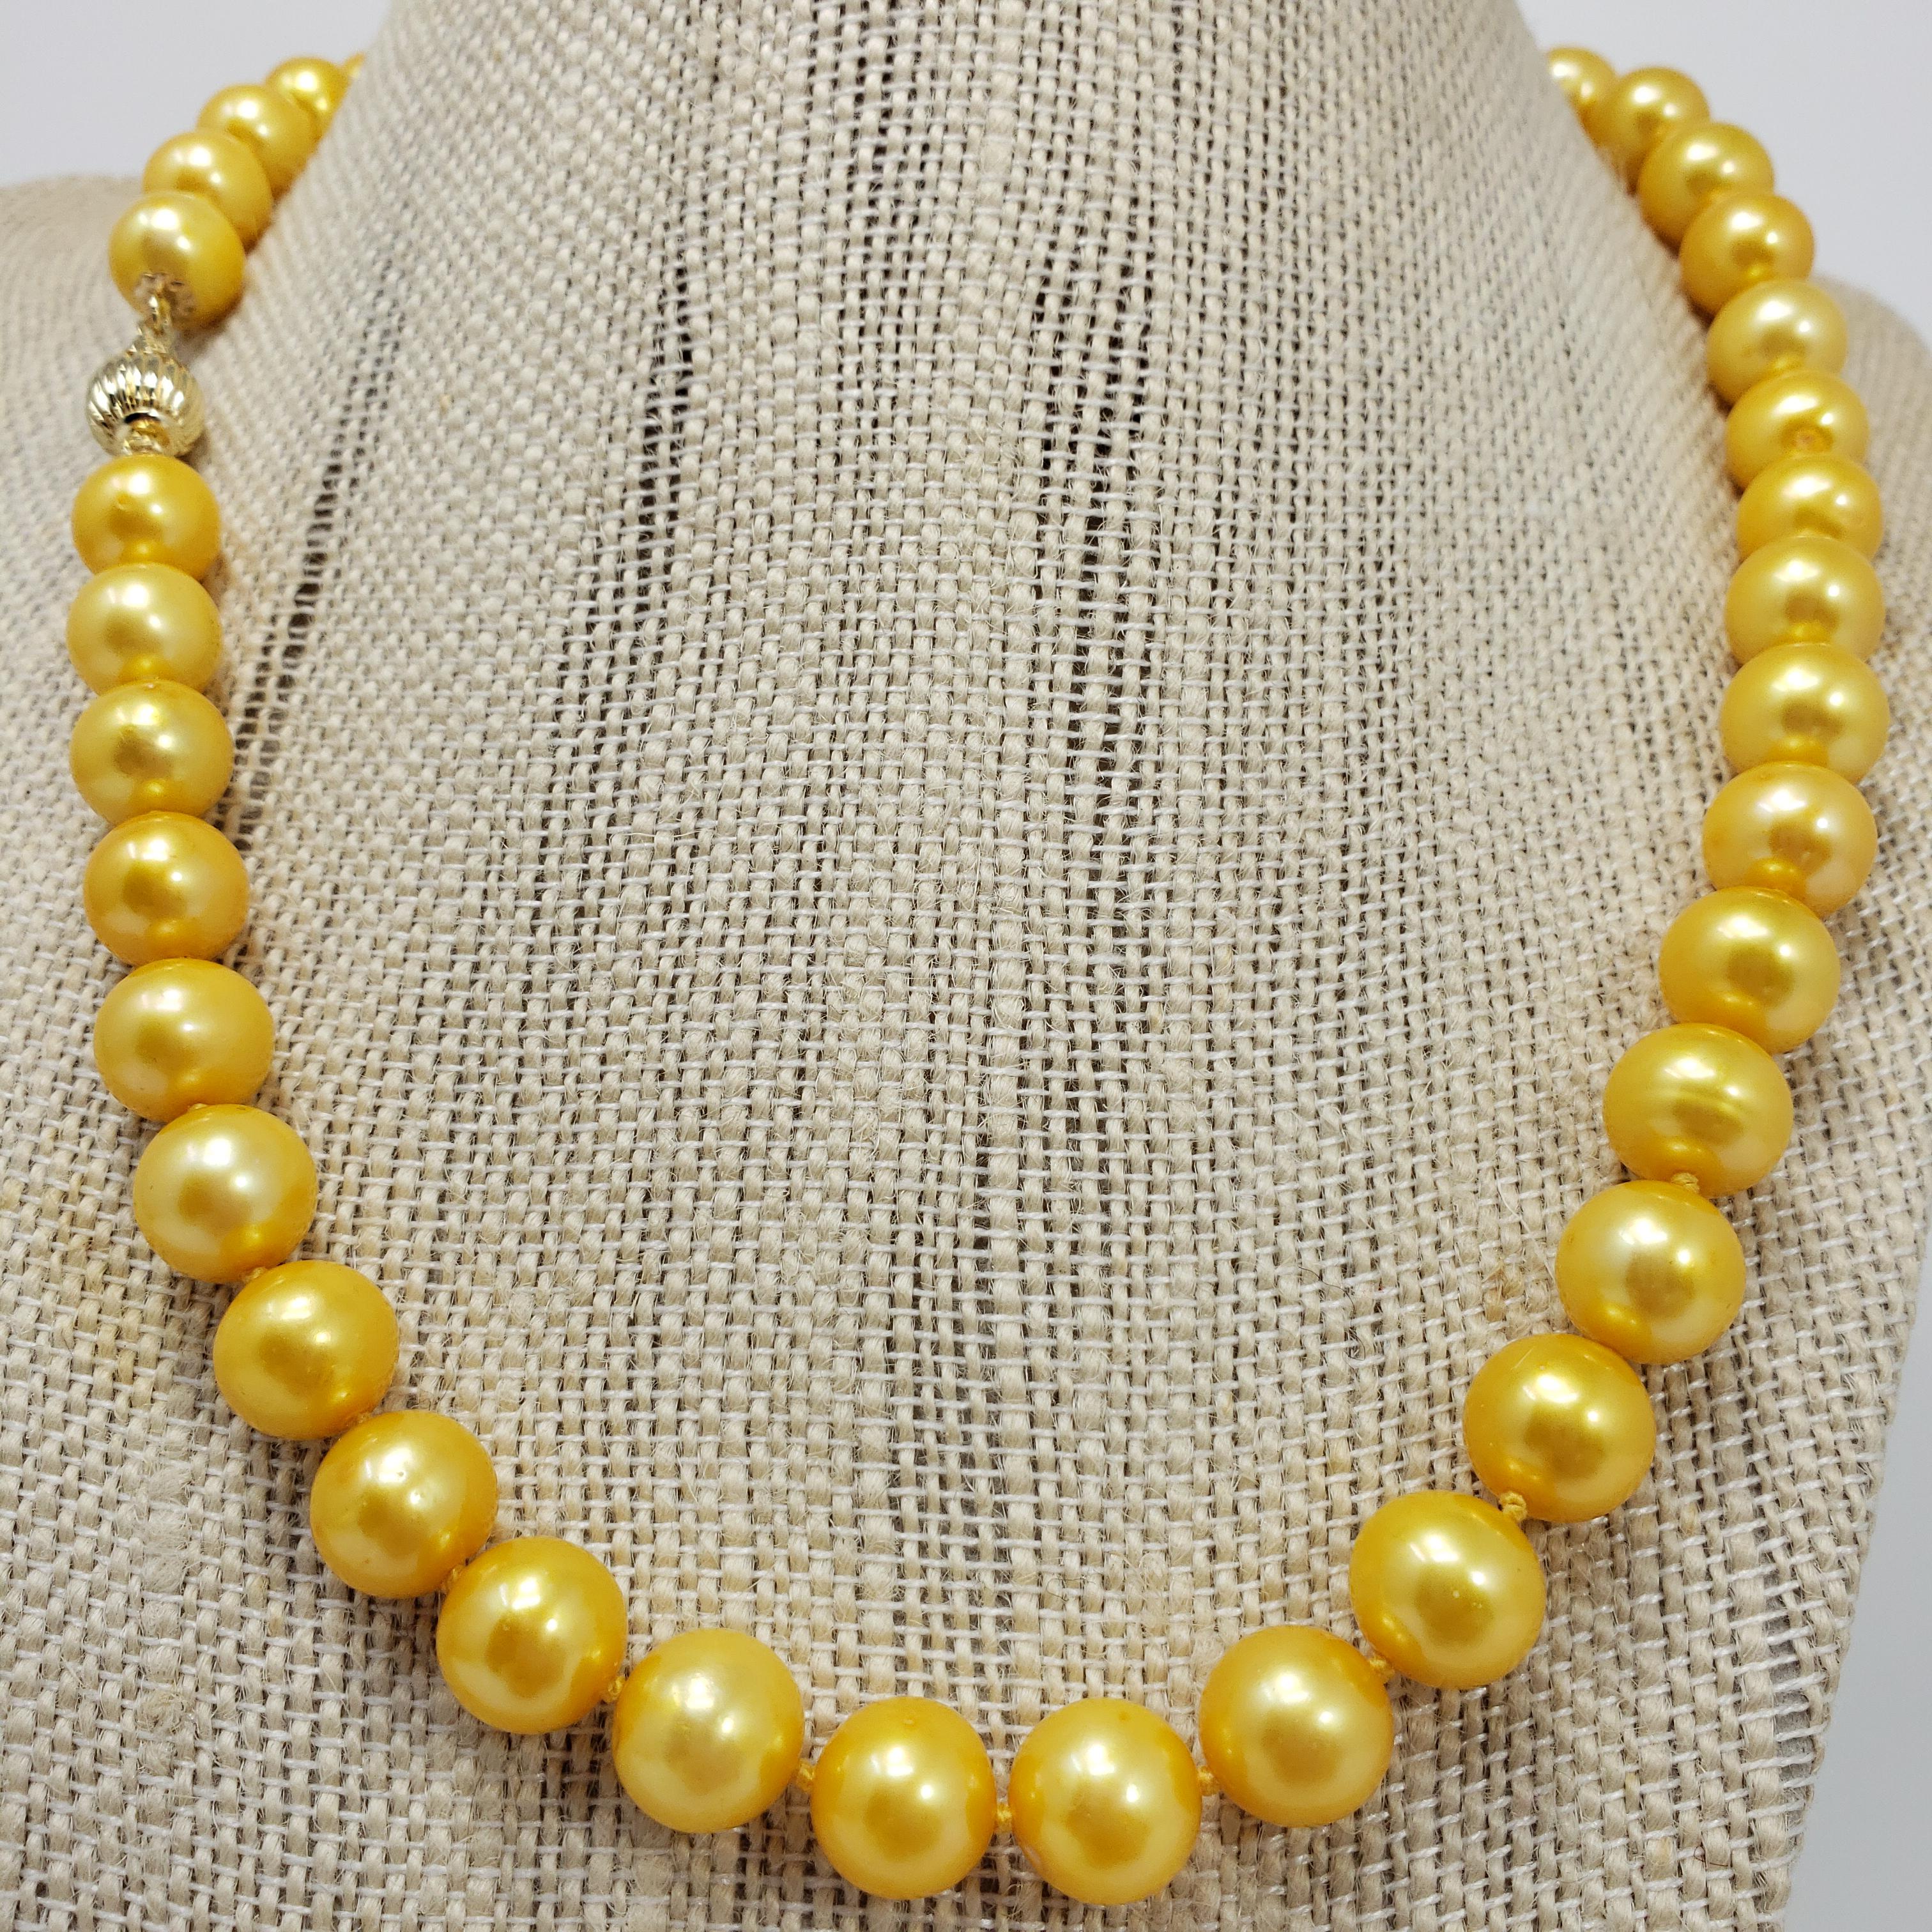 An extravagant South Sea pearl necklace, feauting a strand of lustrous pearls on a knotted yellow string necklace. Accented with a lavish 14K yellow gold clasp. Exquisite!

Hallmarks: 14K
Length 48cm
Pearls range from 9.6mm to 10mm